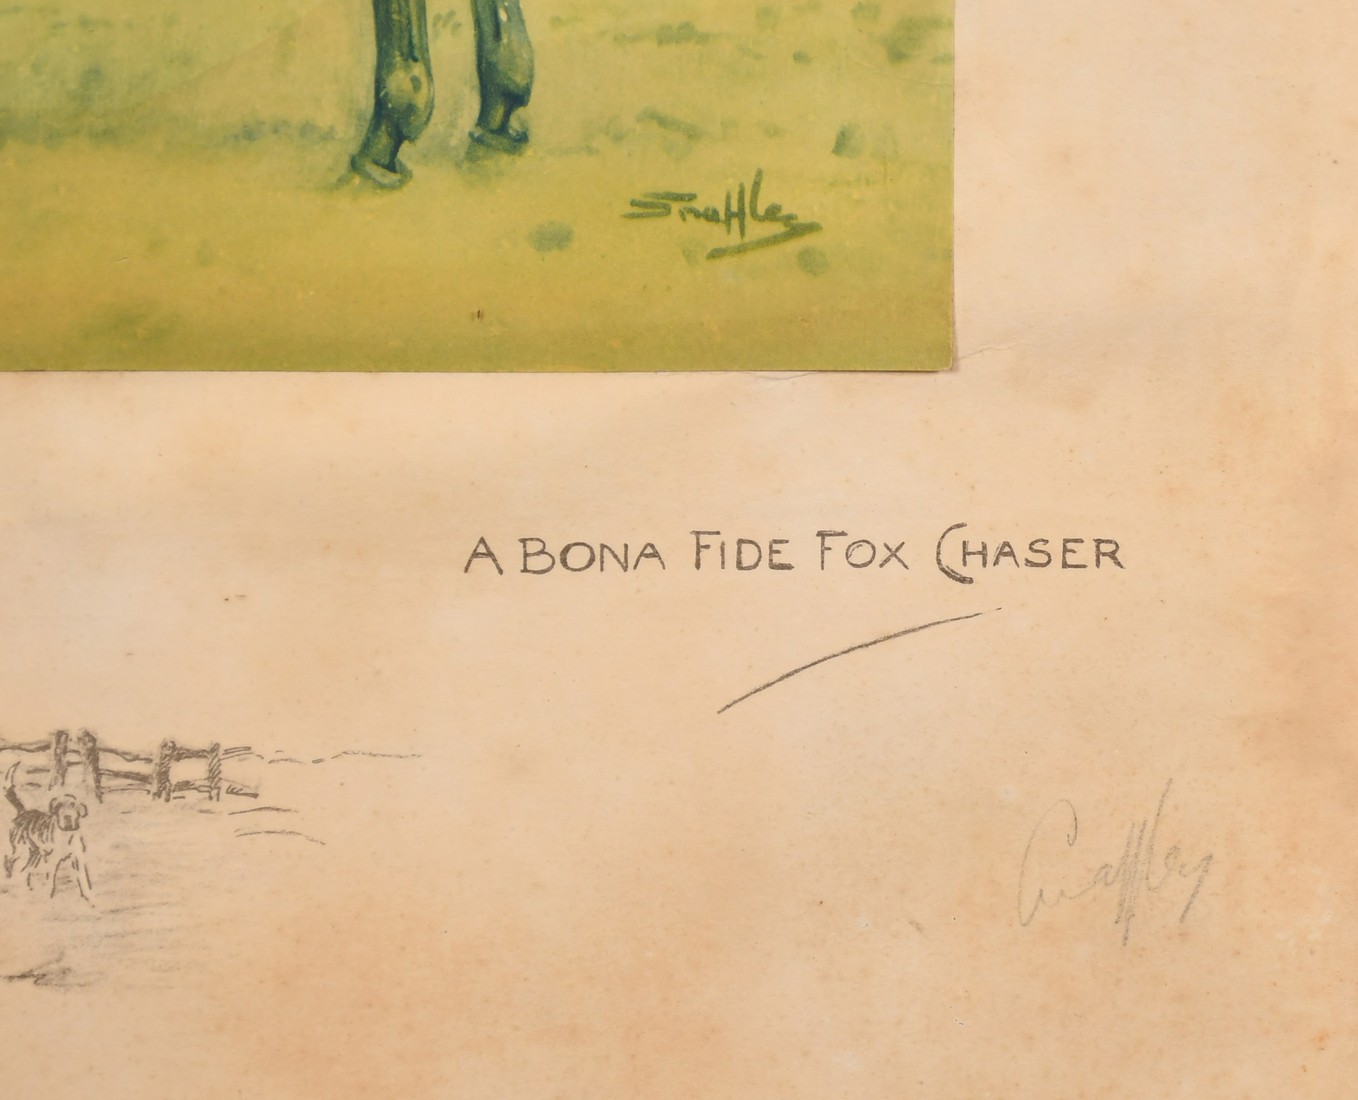 Snaffles, 'A Bona Fide Fox Chaser', colour print, signed in pencil, 10" x 12" (25.5 x 30.5cm). - Image 3 of 4